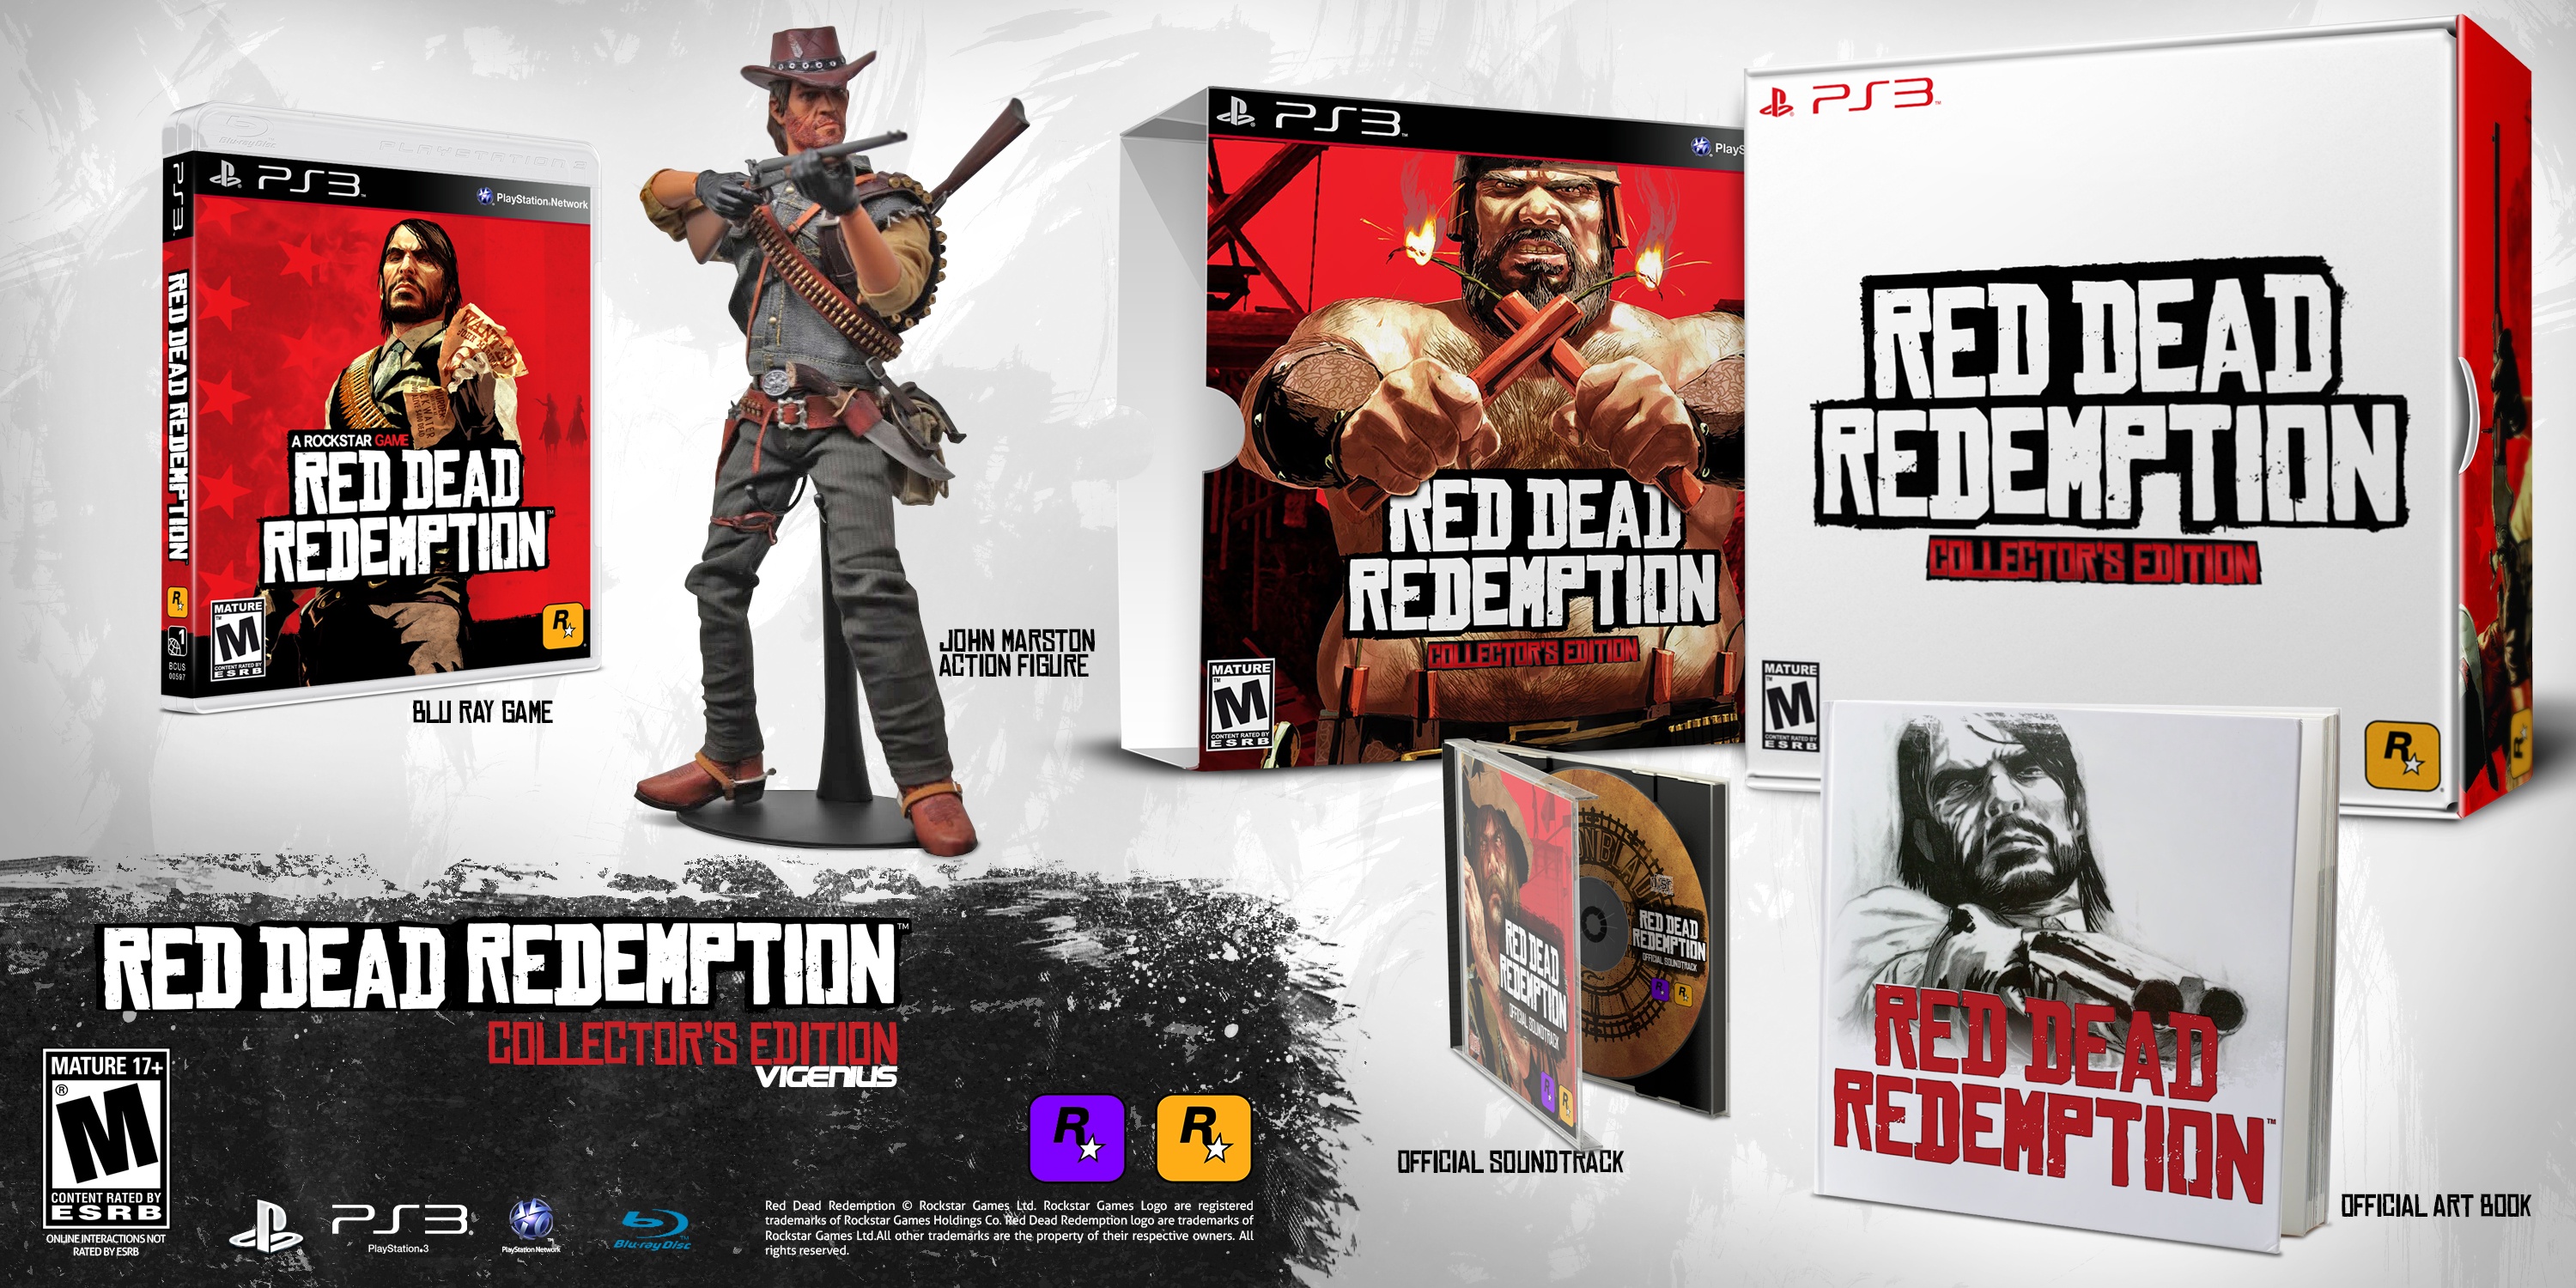 Red Dead Redemption Collector's Edition box cover